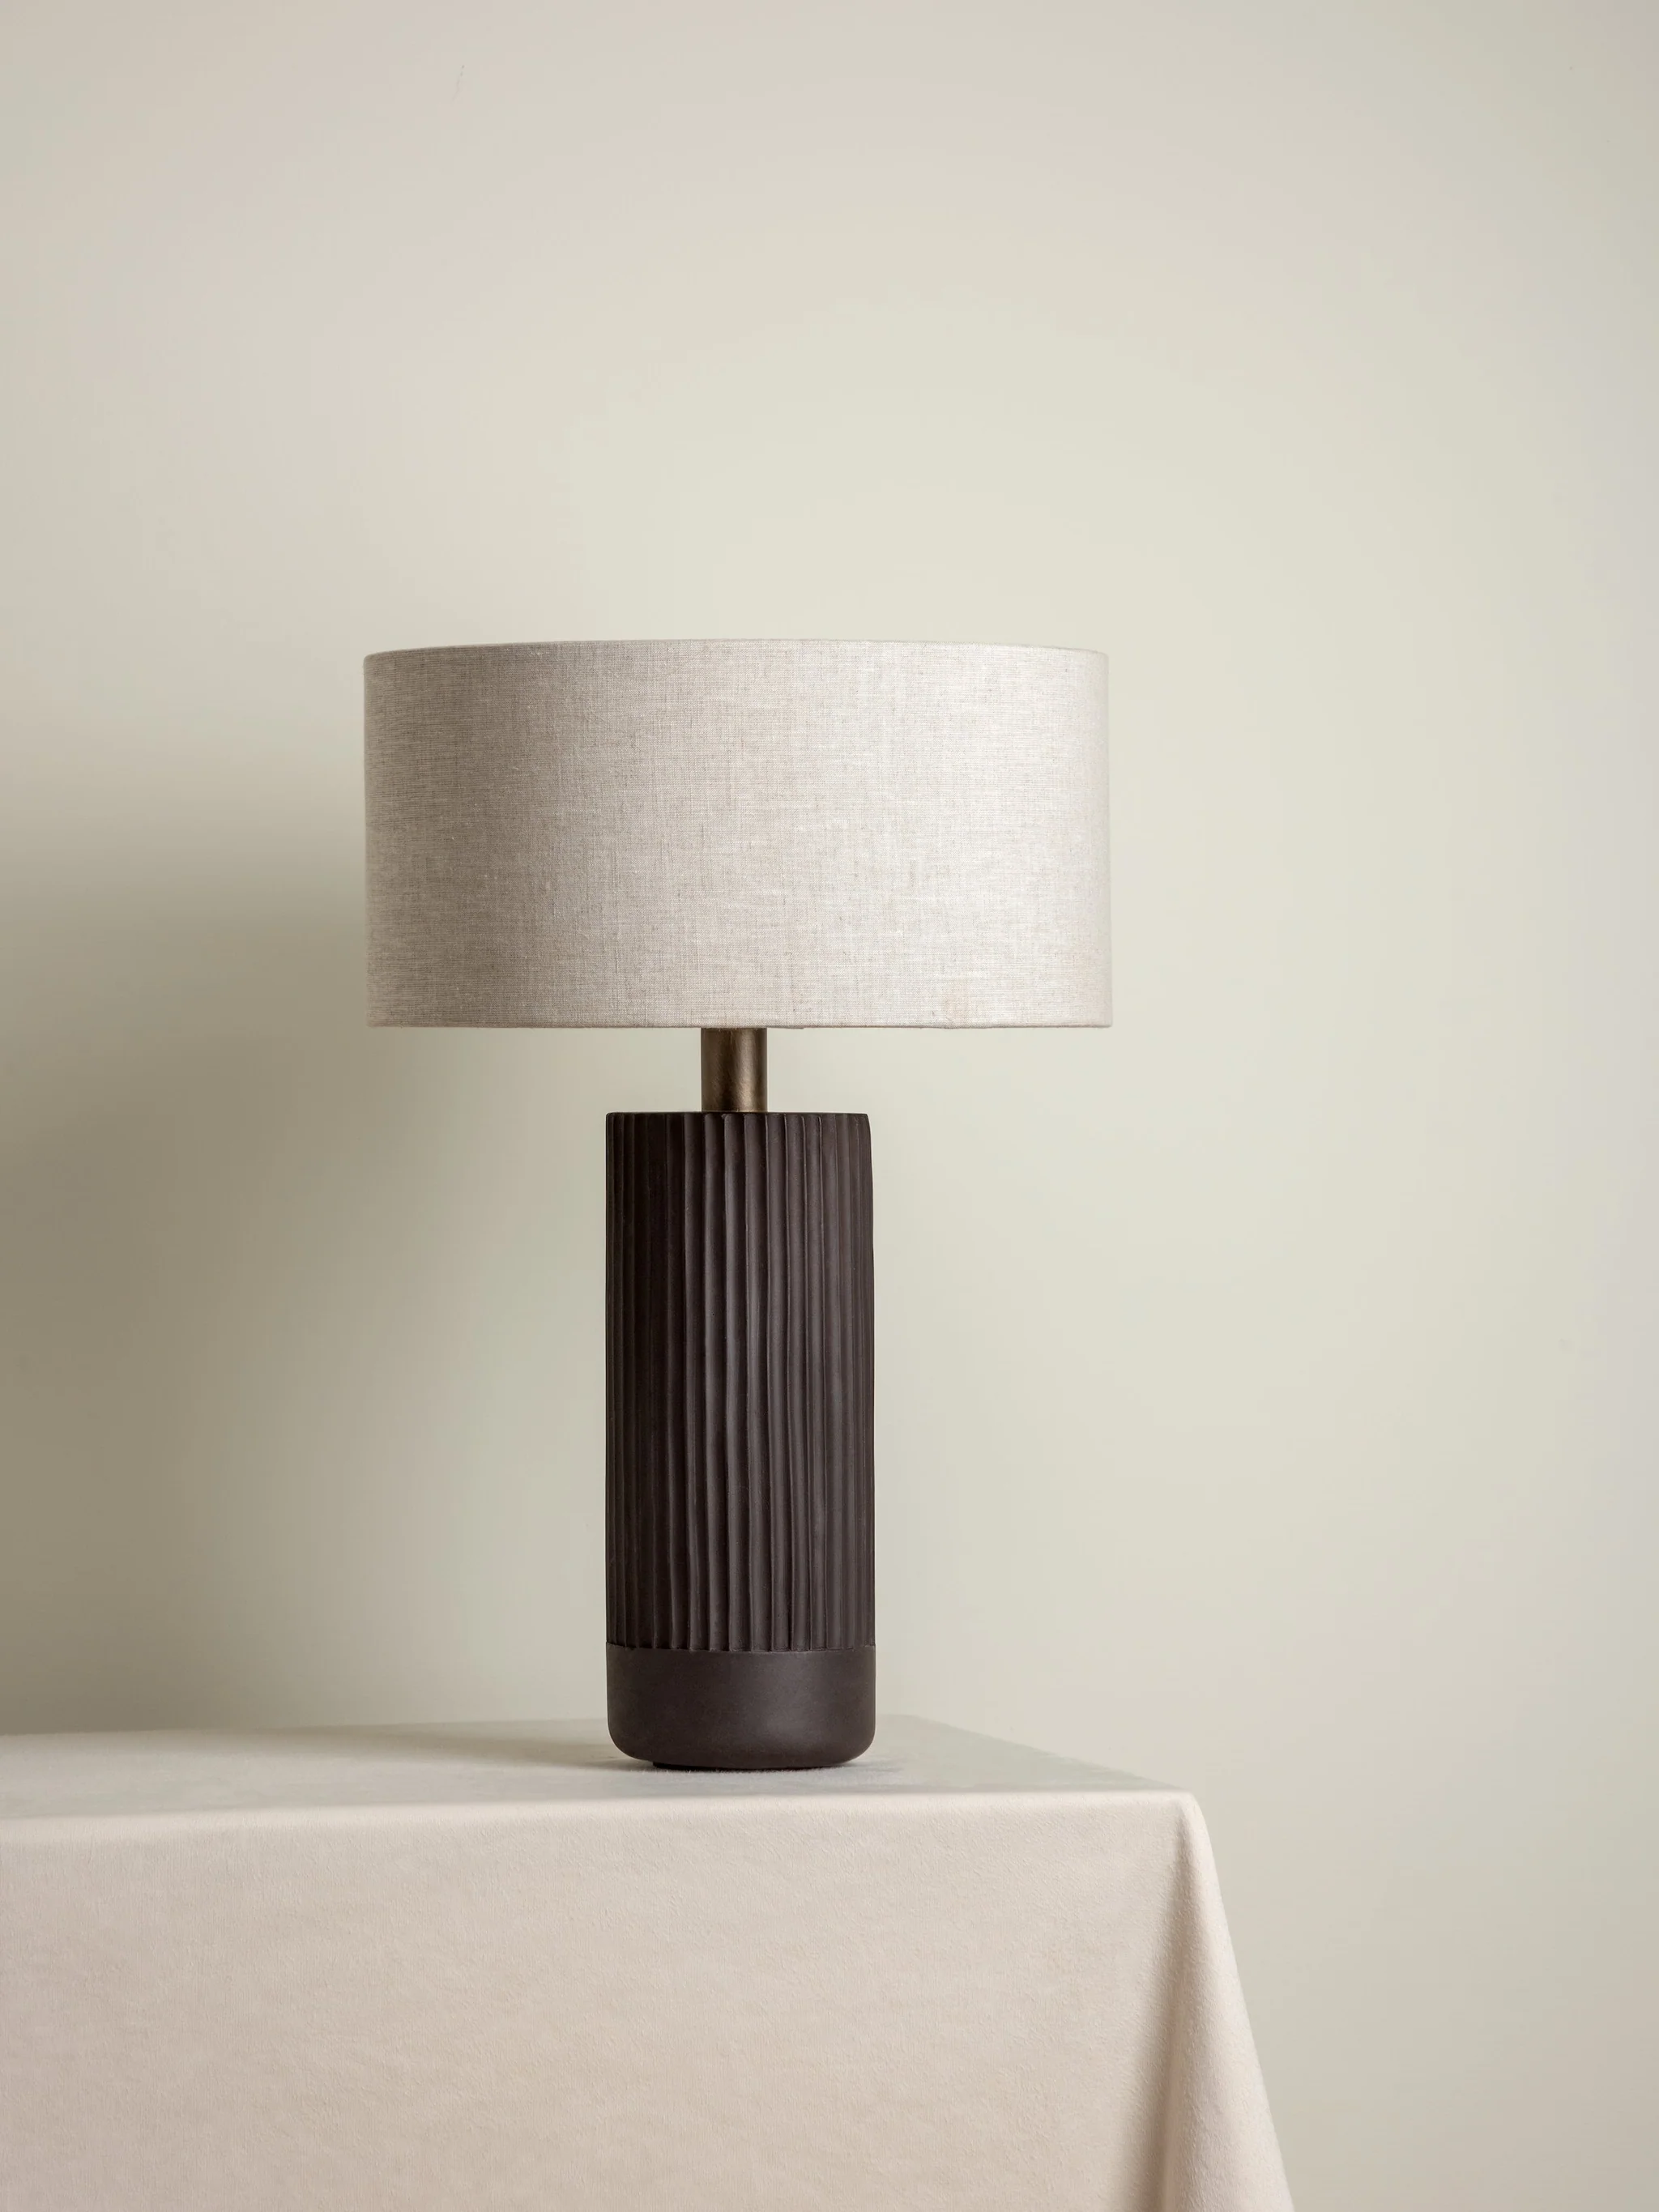 Side Lamps For Bedrooms : Elegant and Functional Side Lamps for Bedrooms A Must-have Addition